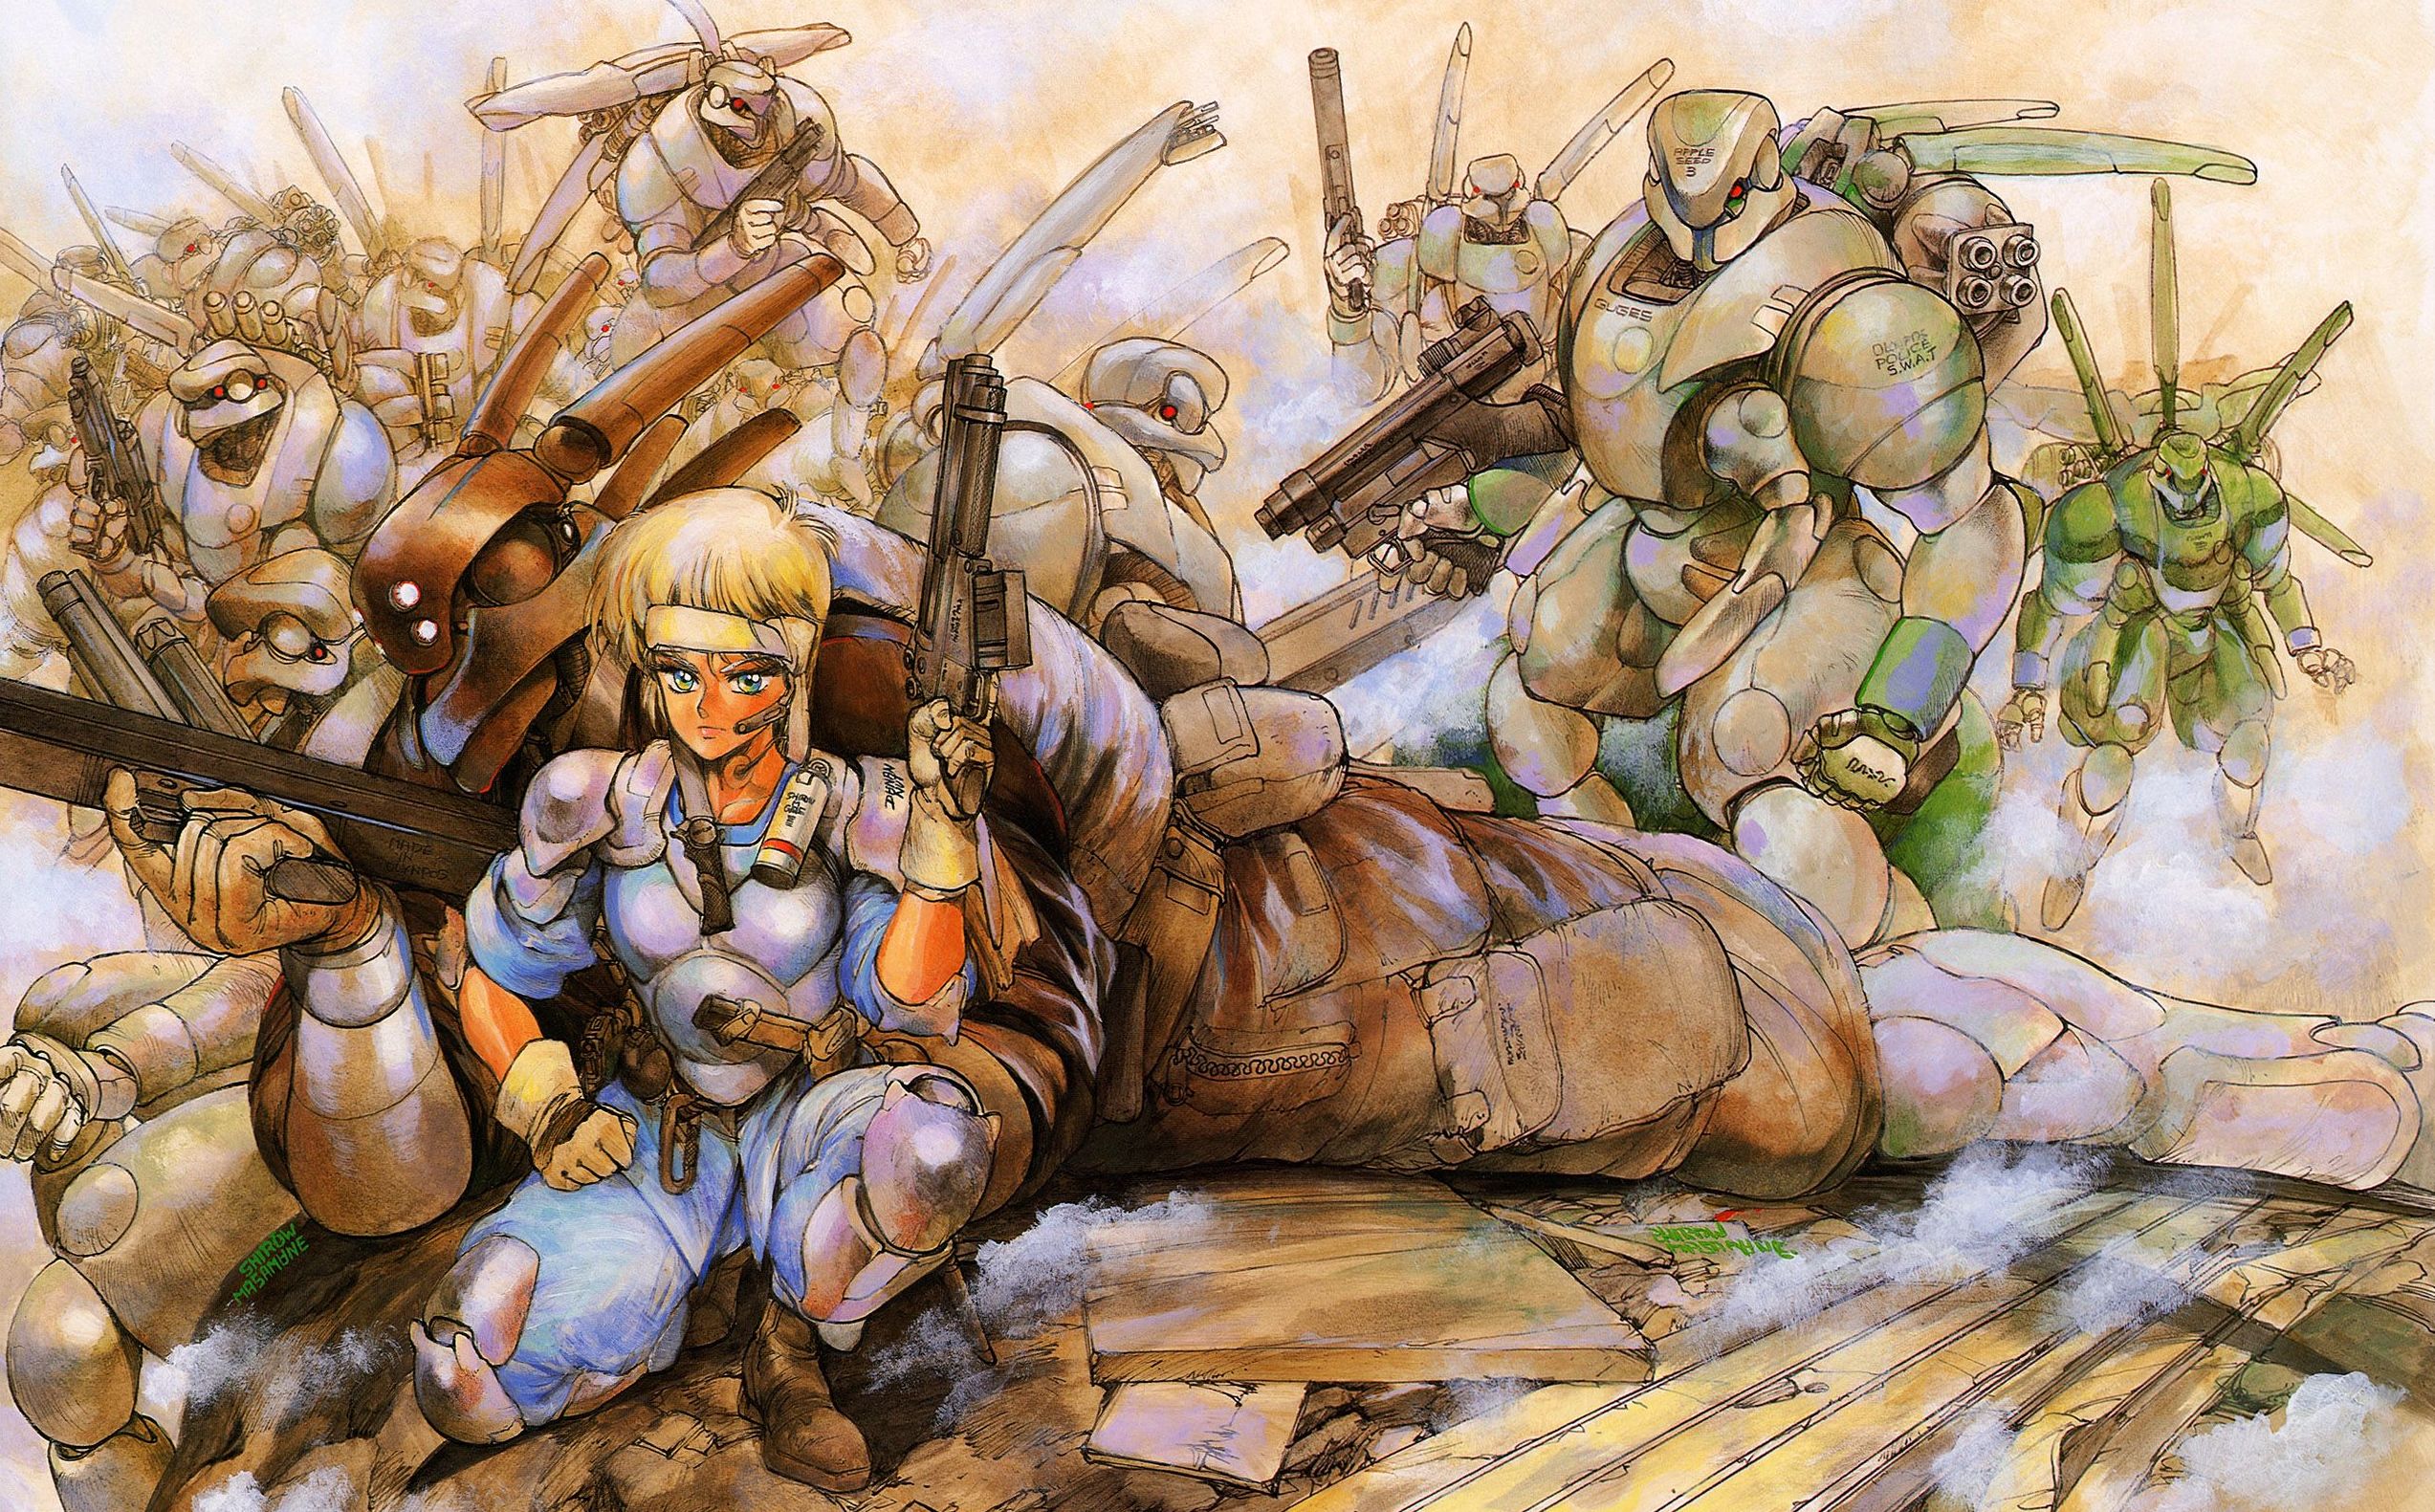 Feature: The universe of Appleseed - Girls With Guns